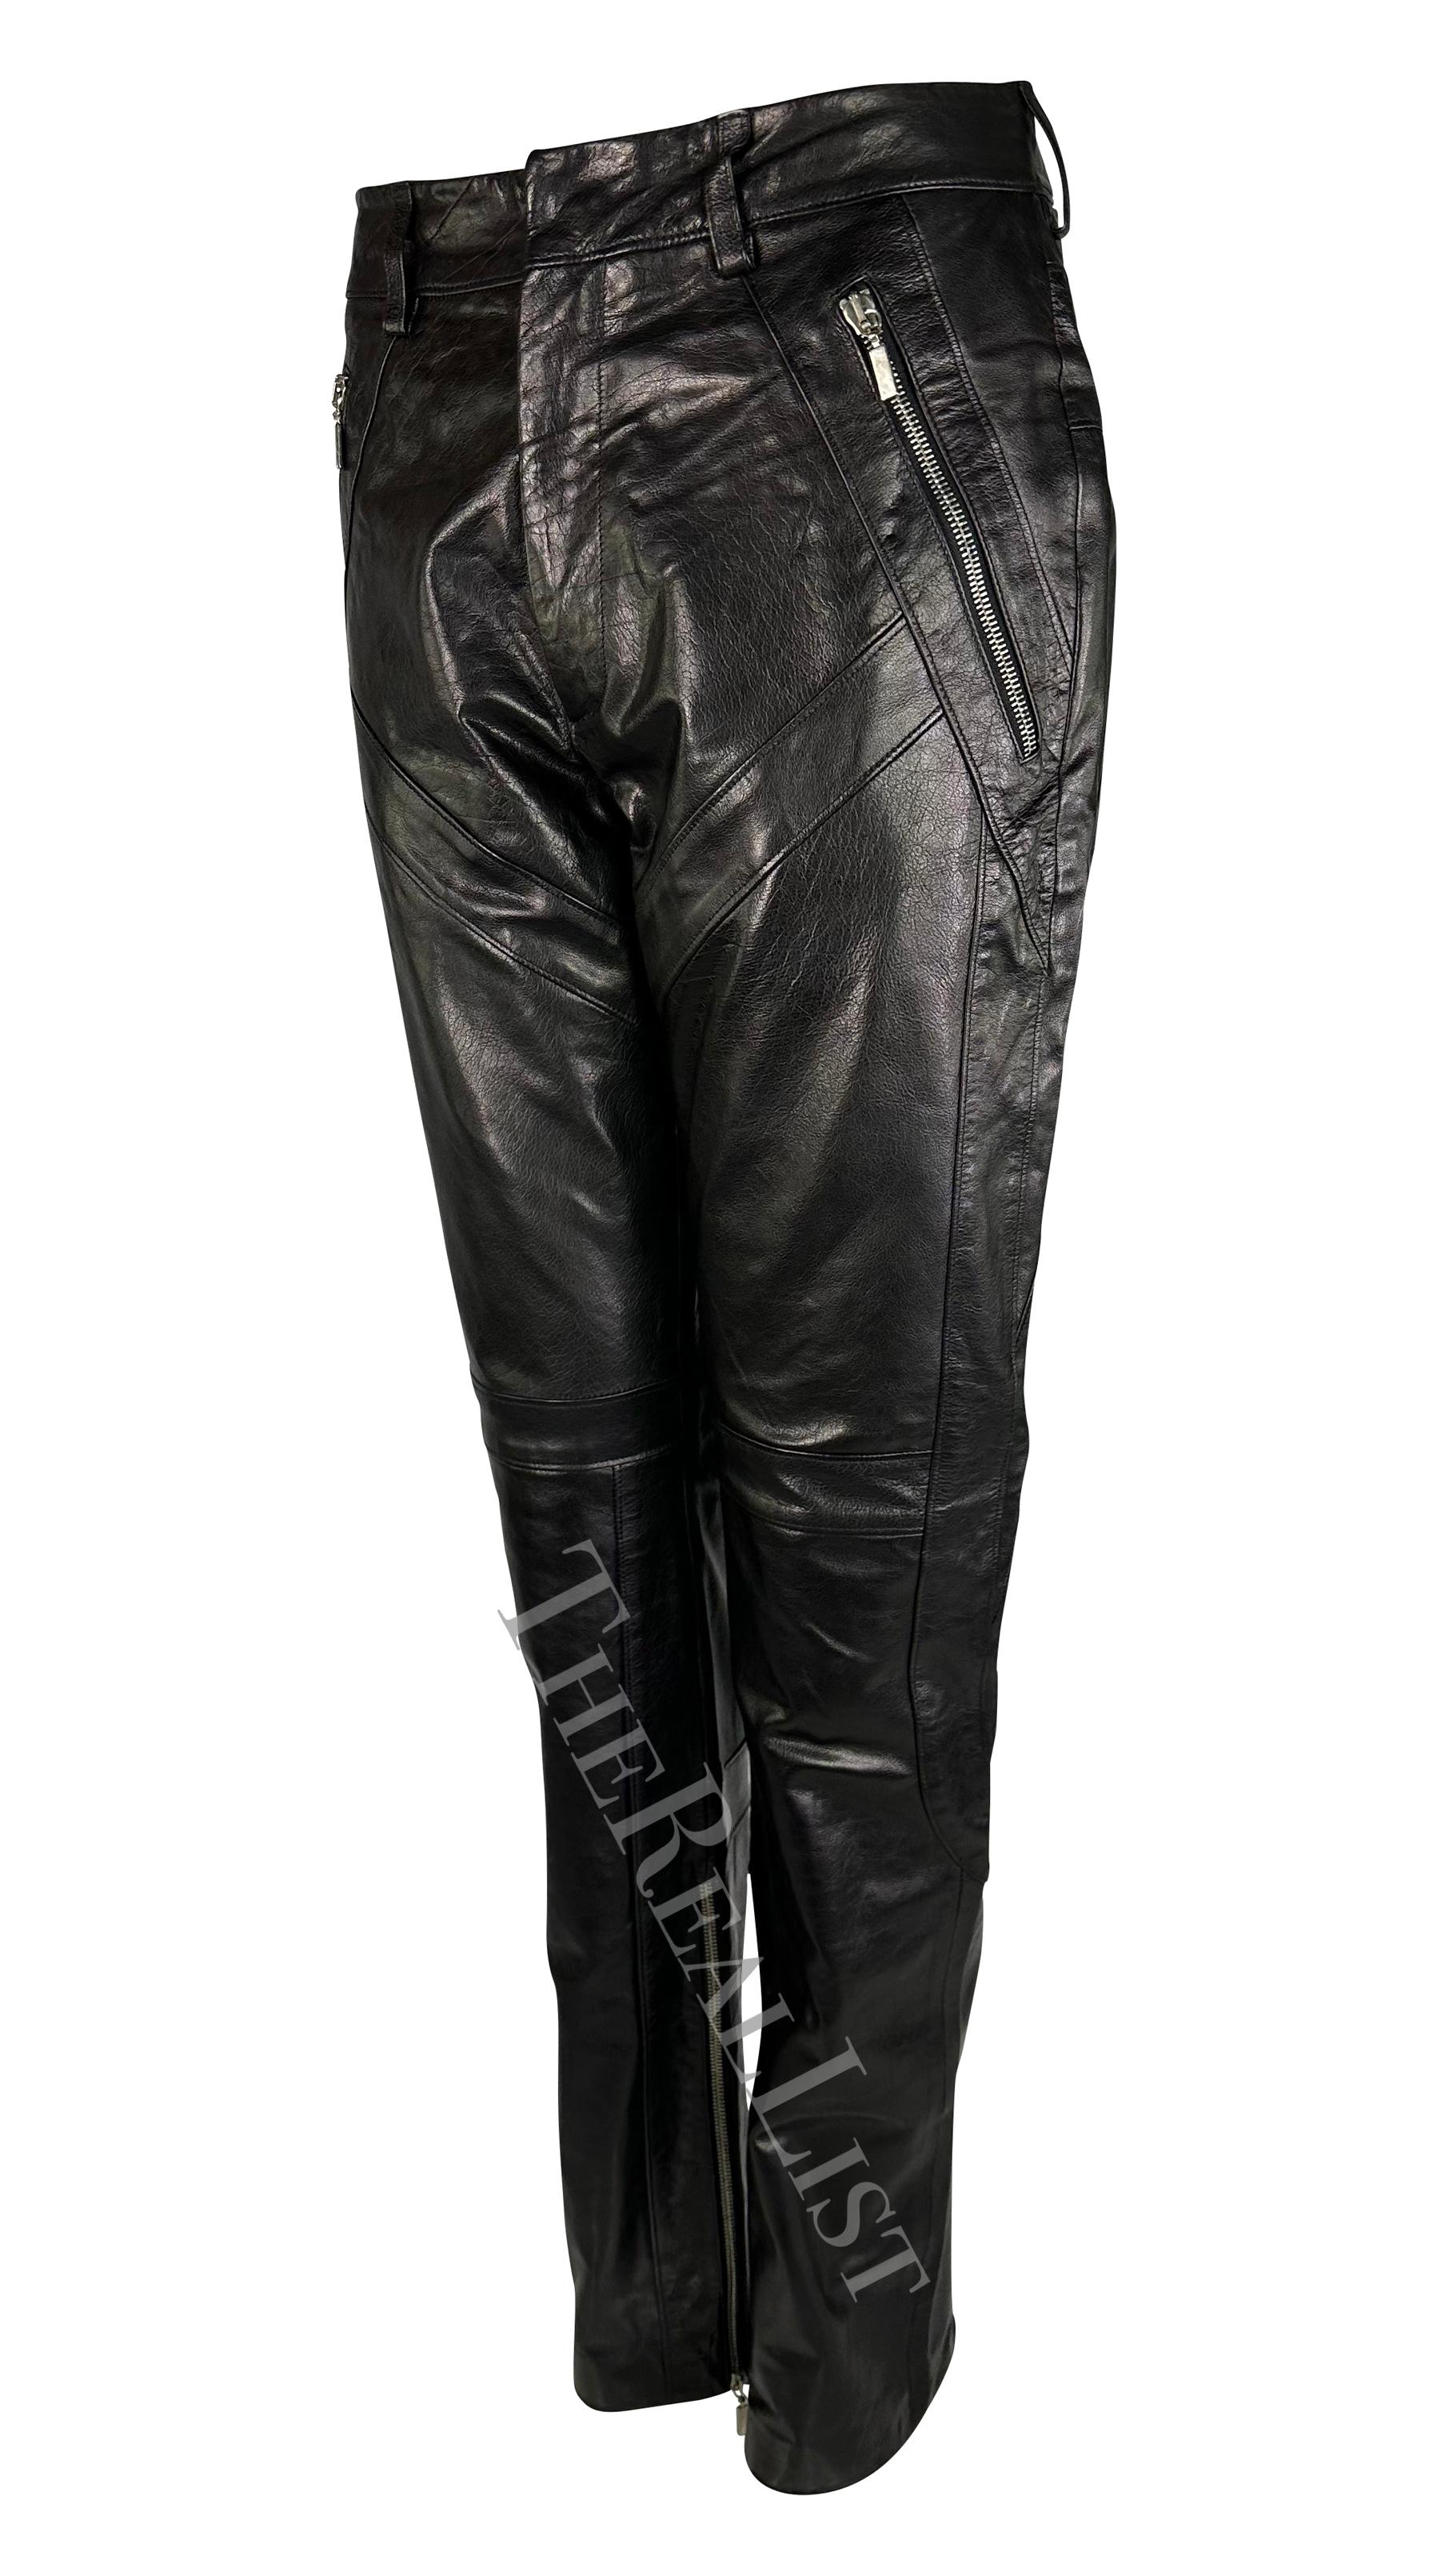 S/S 2002 Gianni Versace by Donatella Black Leather Moto Style Zip Pants For Sale 1